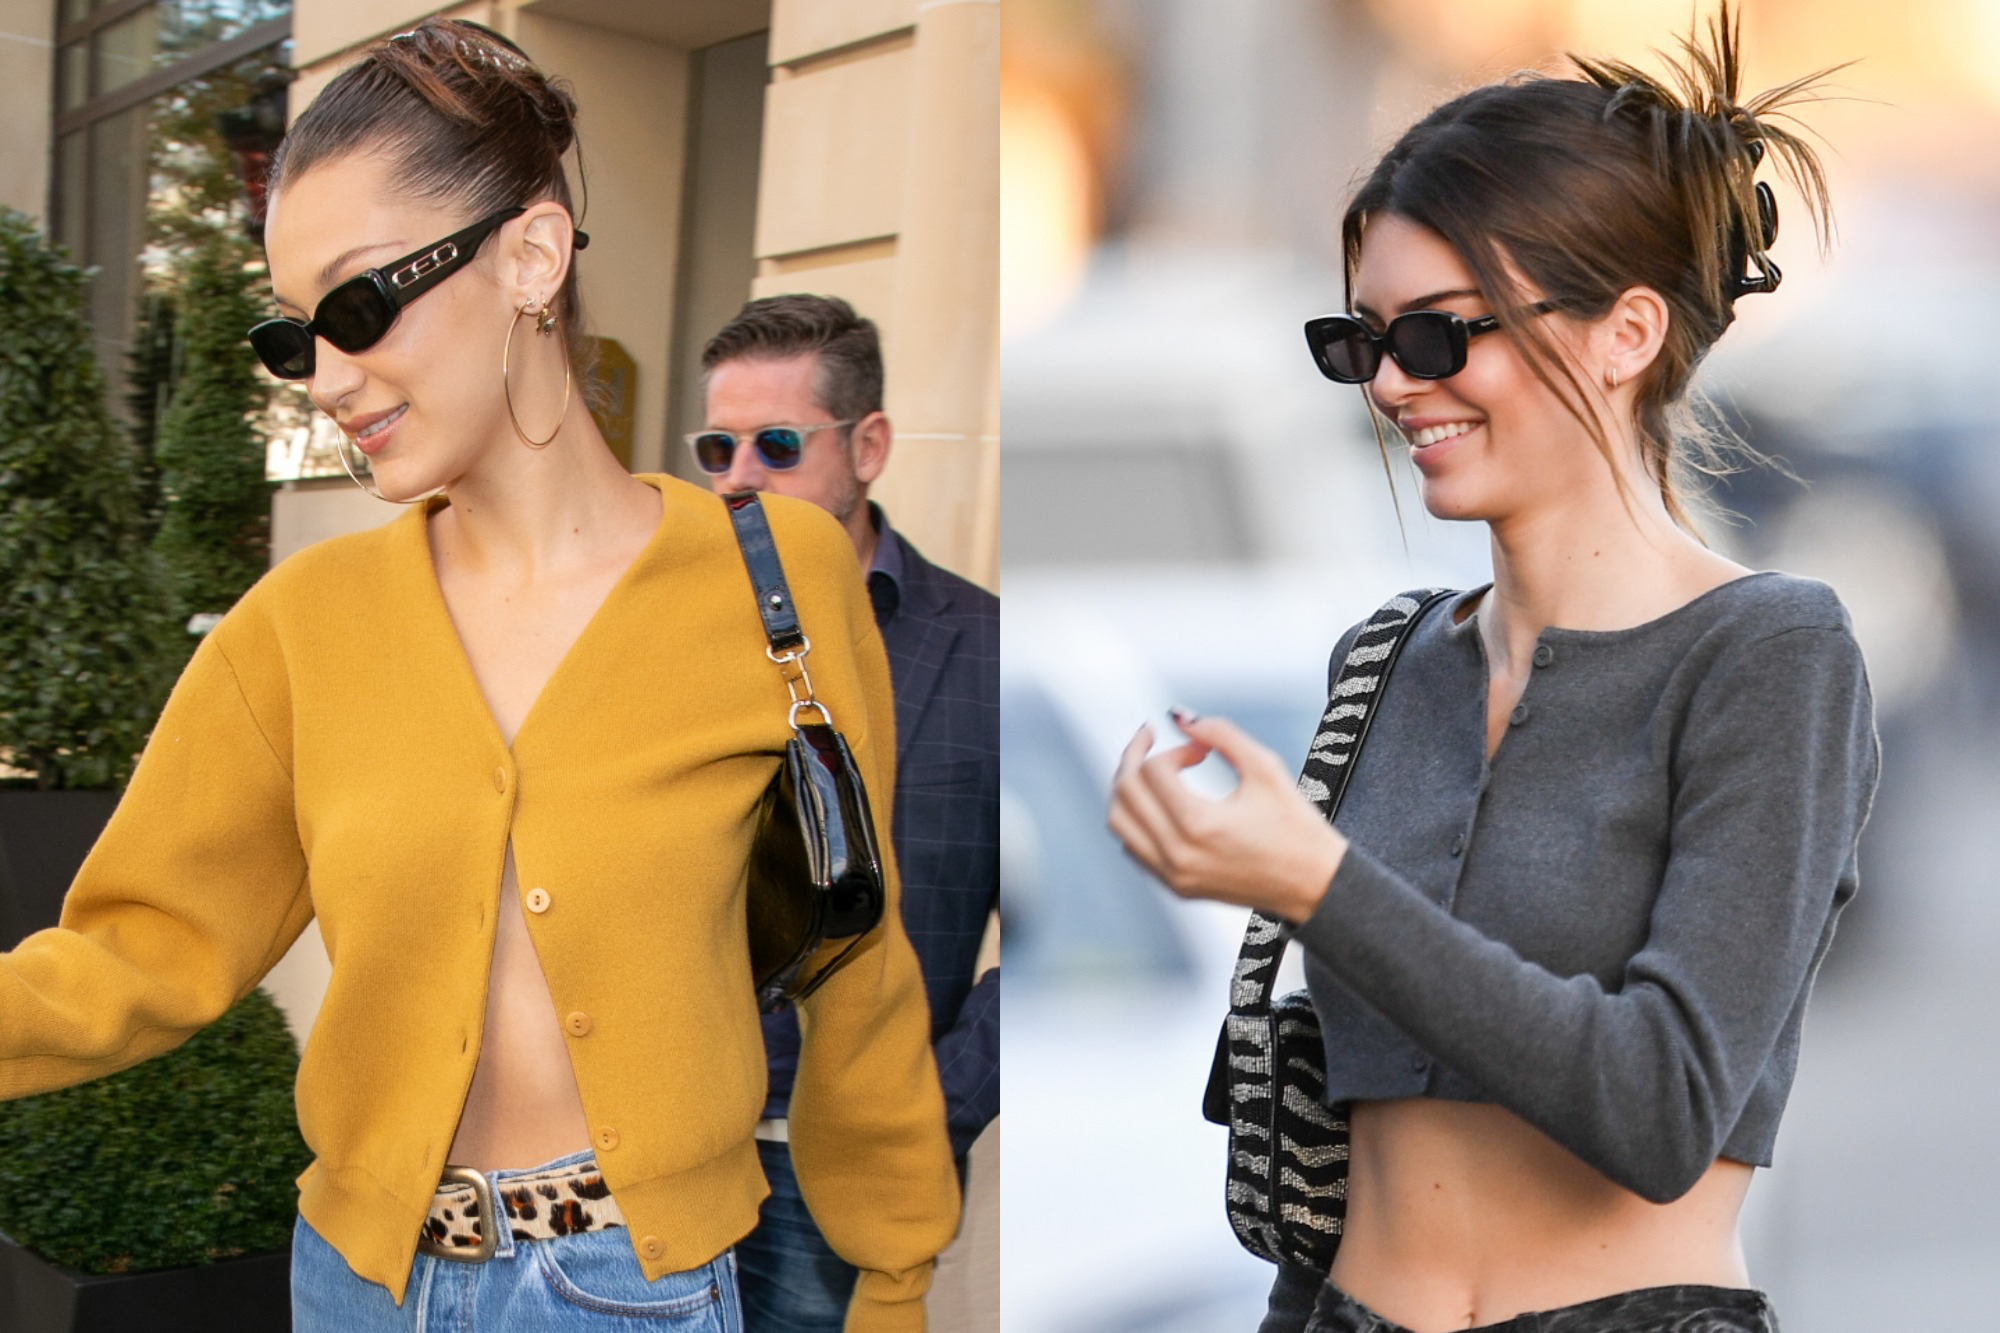 claw clips, bella hadid, kendall jenner